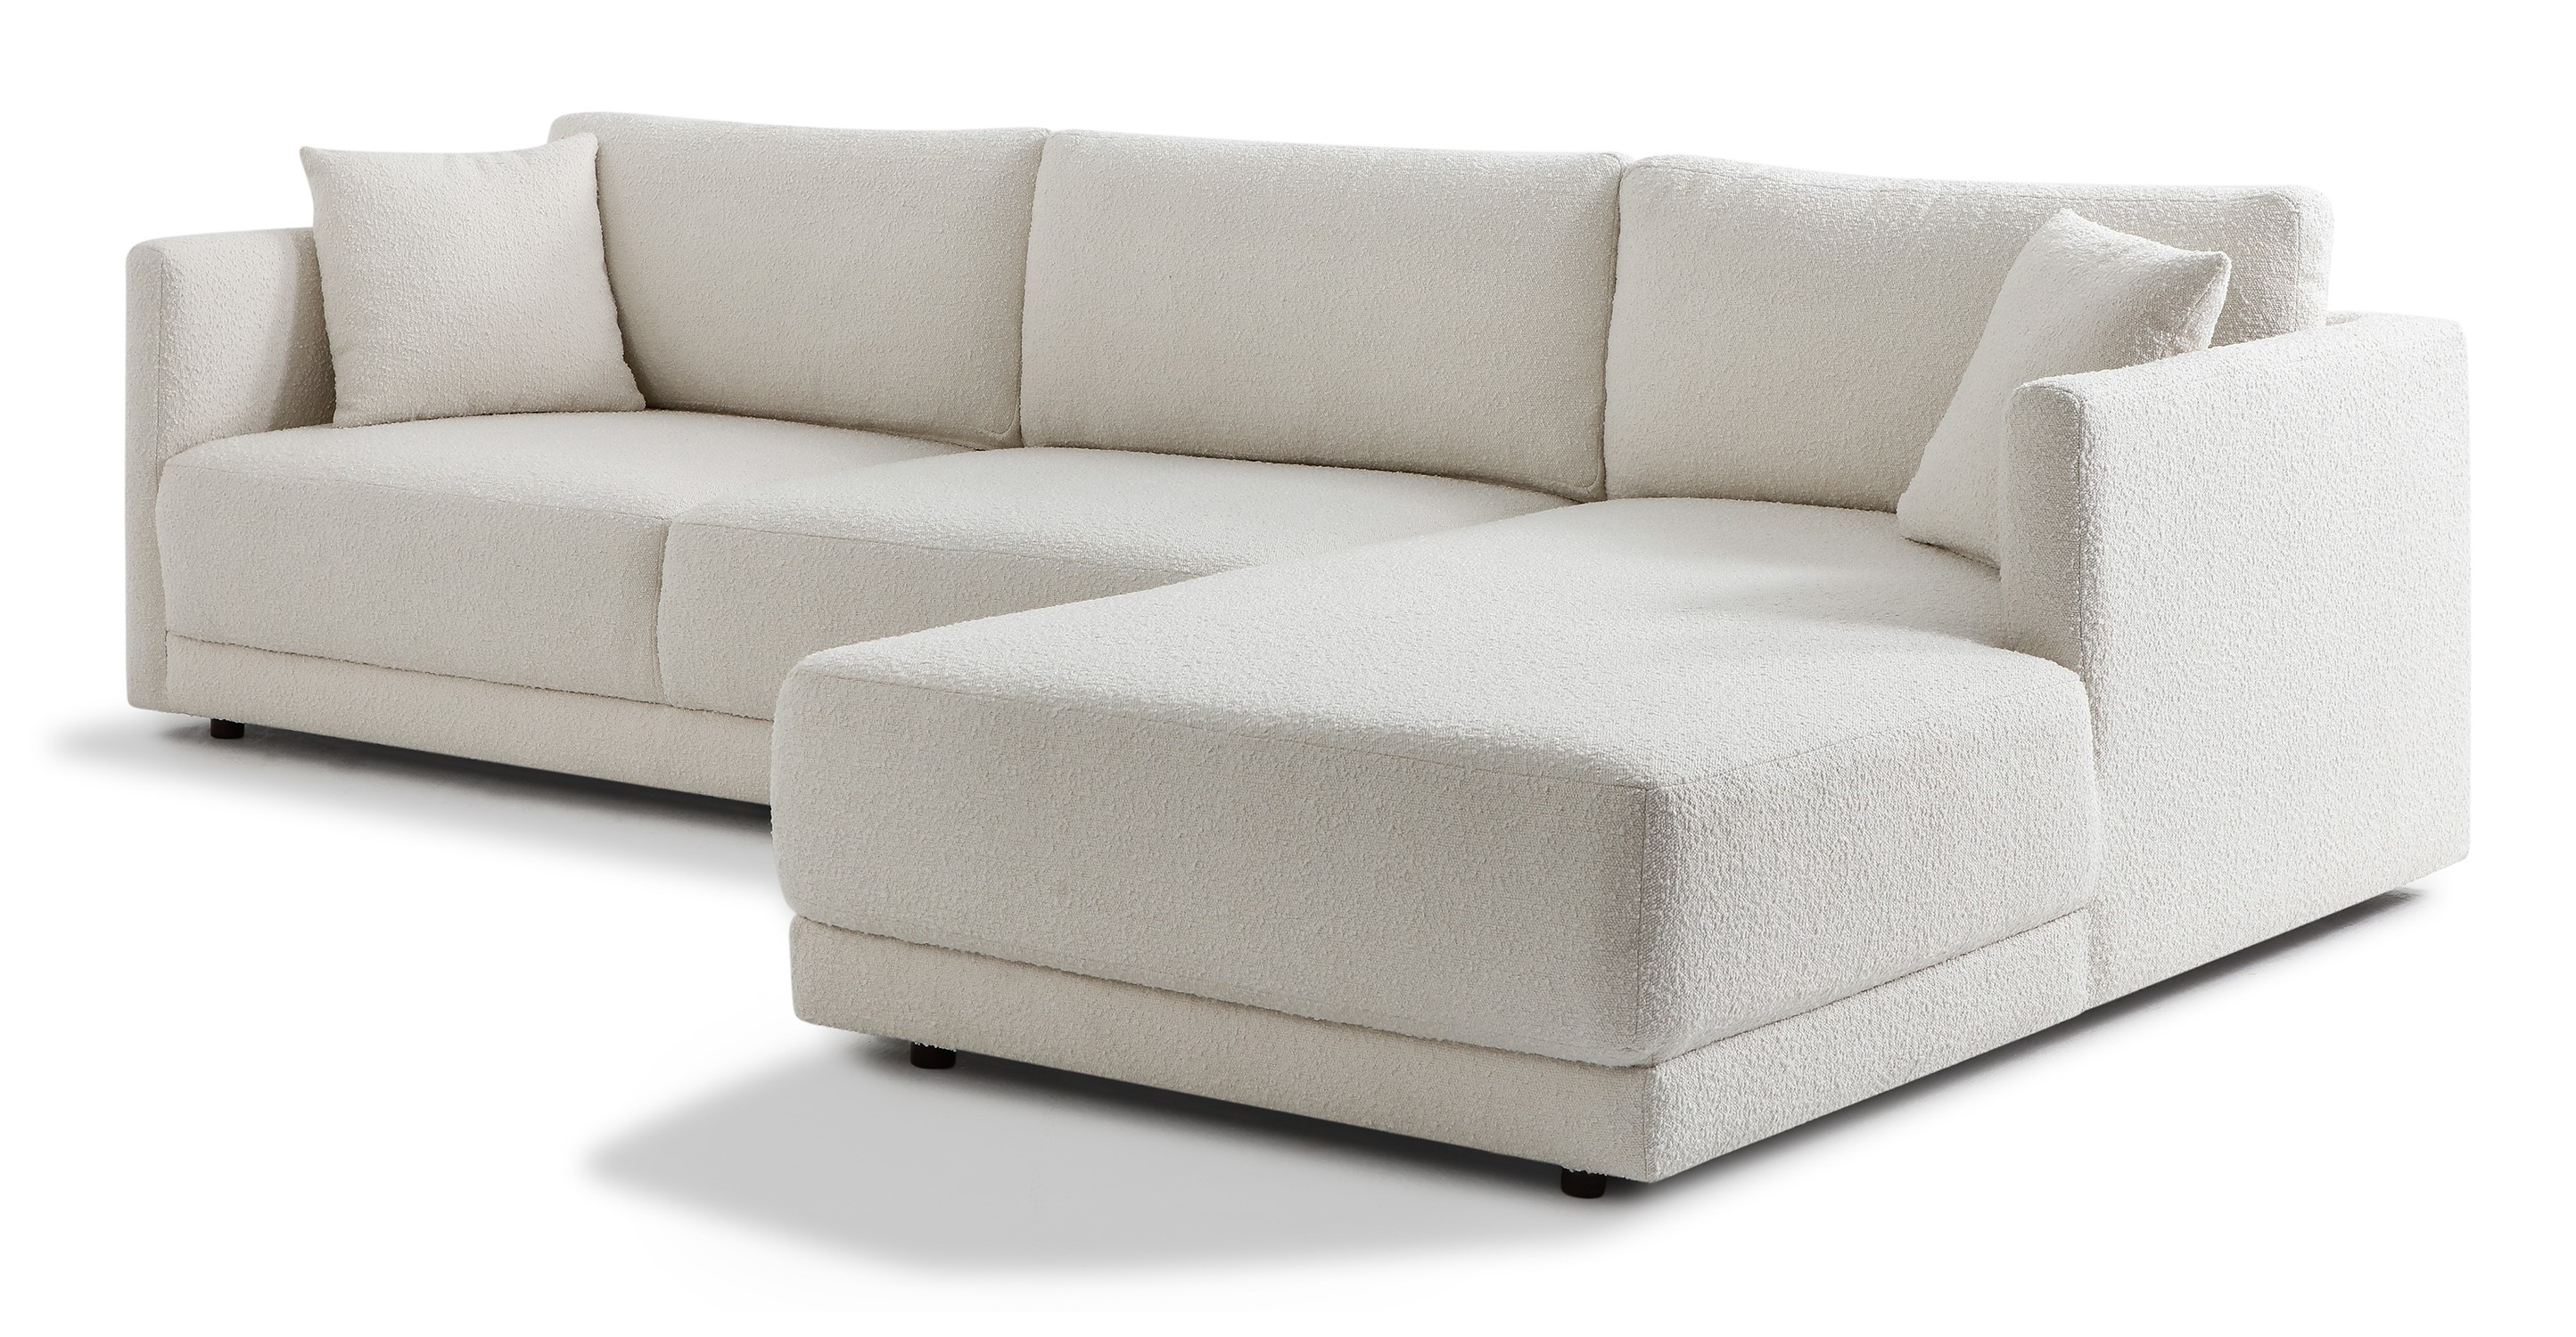 Blanc Domus right sectional is a floor sectional with a chaise on the right (when facing the sectional) and a sofa option on the left. This sofa has removable back cushions, low profile arms, and is 100% upholstered. The sofa is floor based and 100% upholstered. This item can be used alone or added as part of the Domus series. The style is modern and minimalist. 